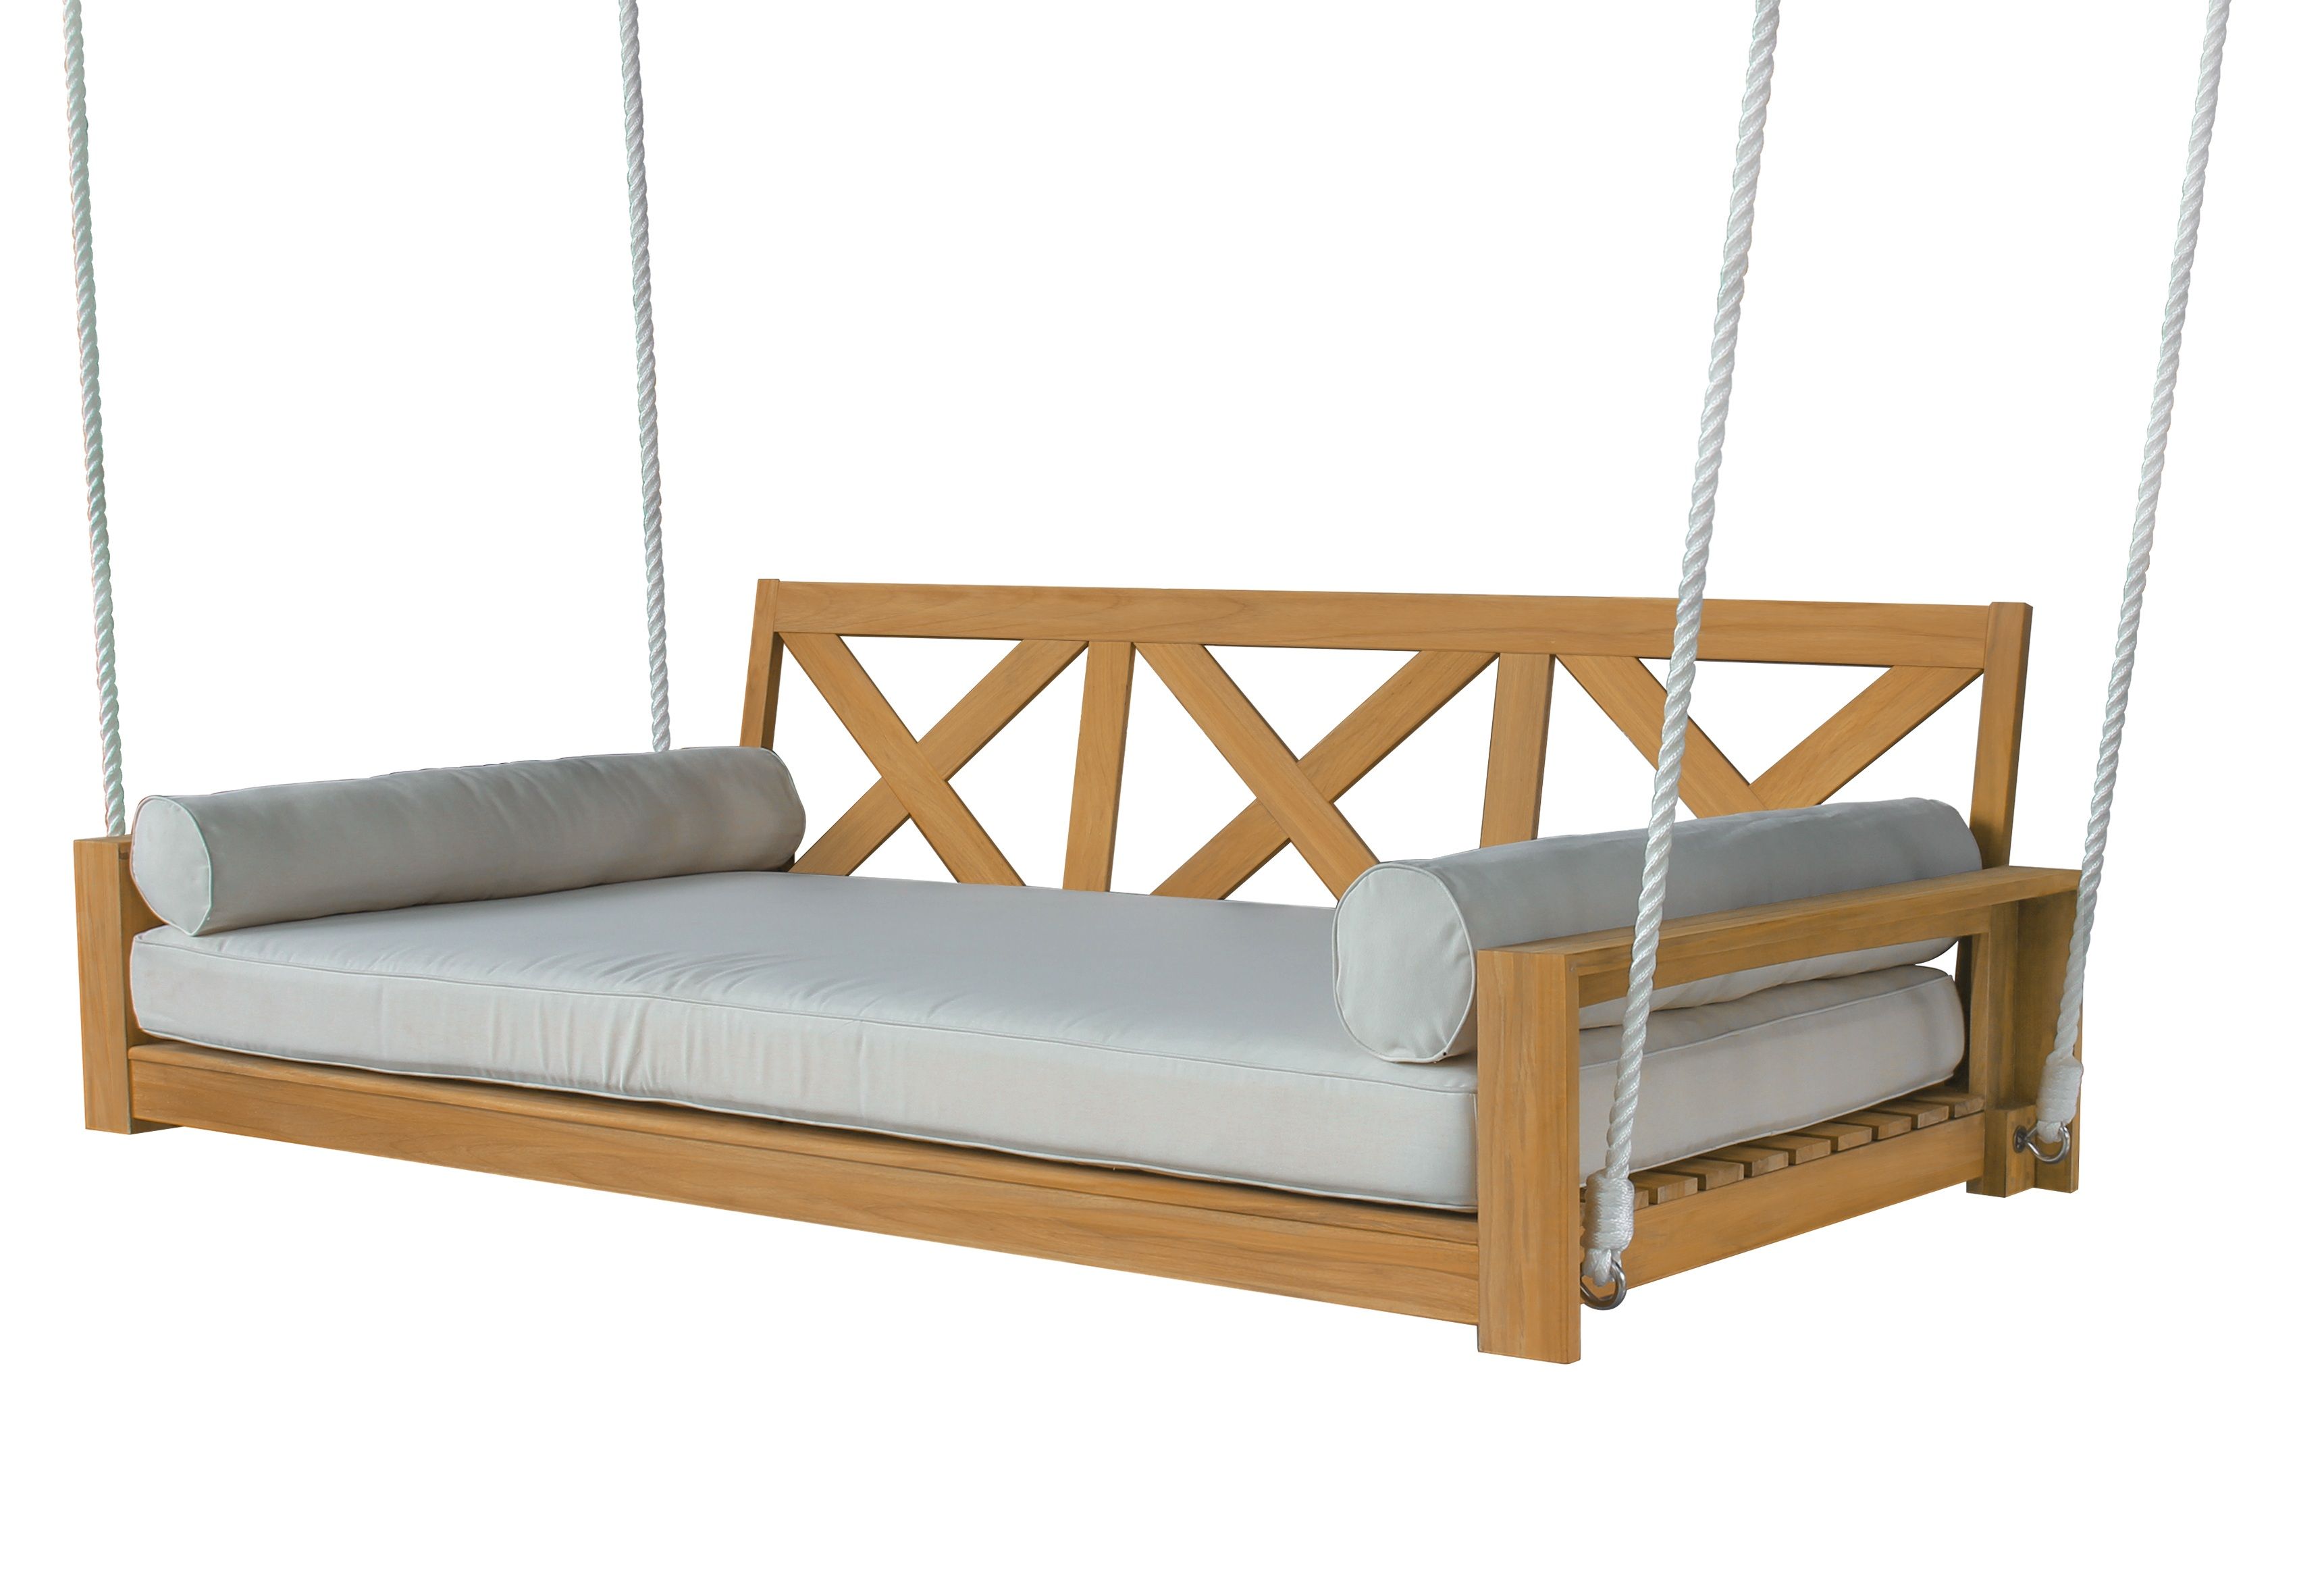 Better Homes & Gardens Ashbrook 3-Persons Teak Porch Swing with Cushions by Dave & Jenny Marrs - image 1 of 10